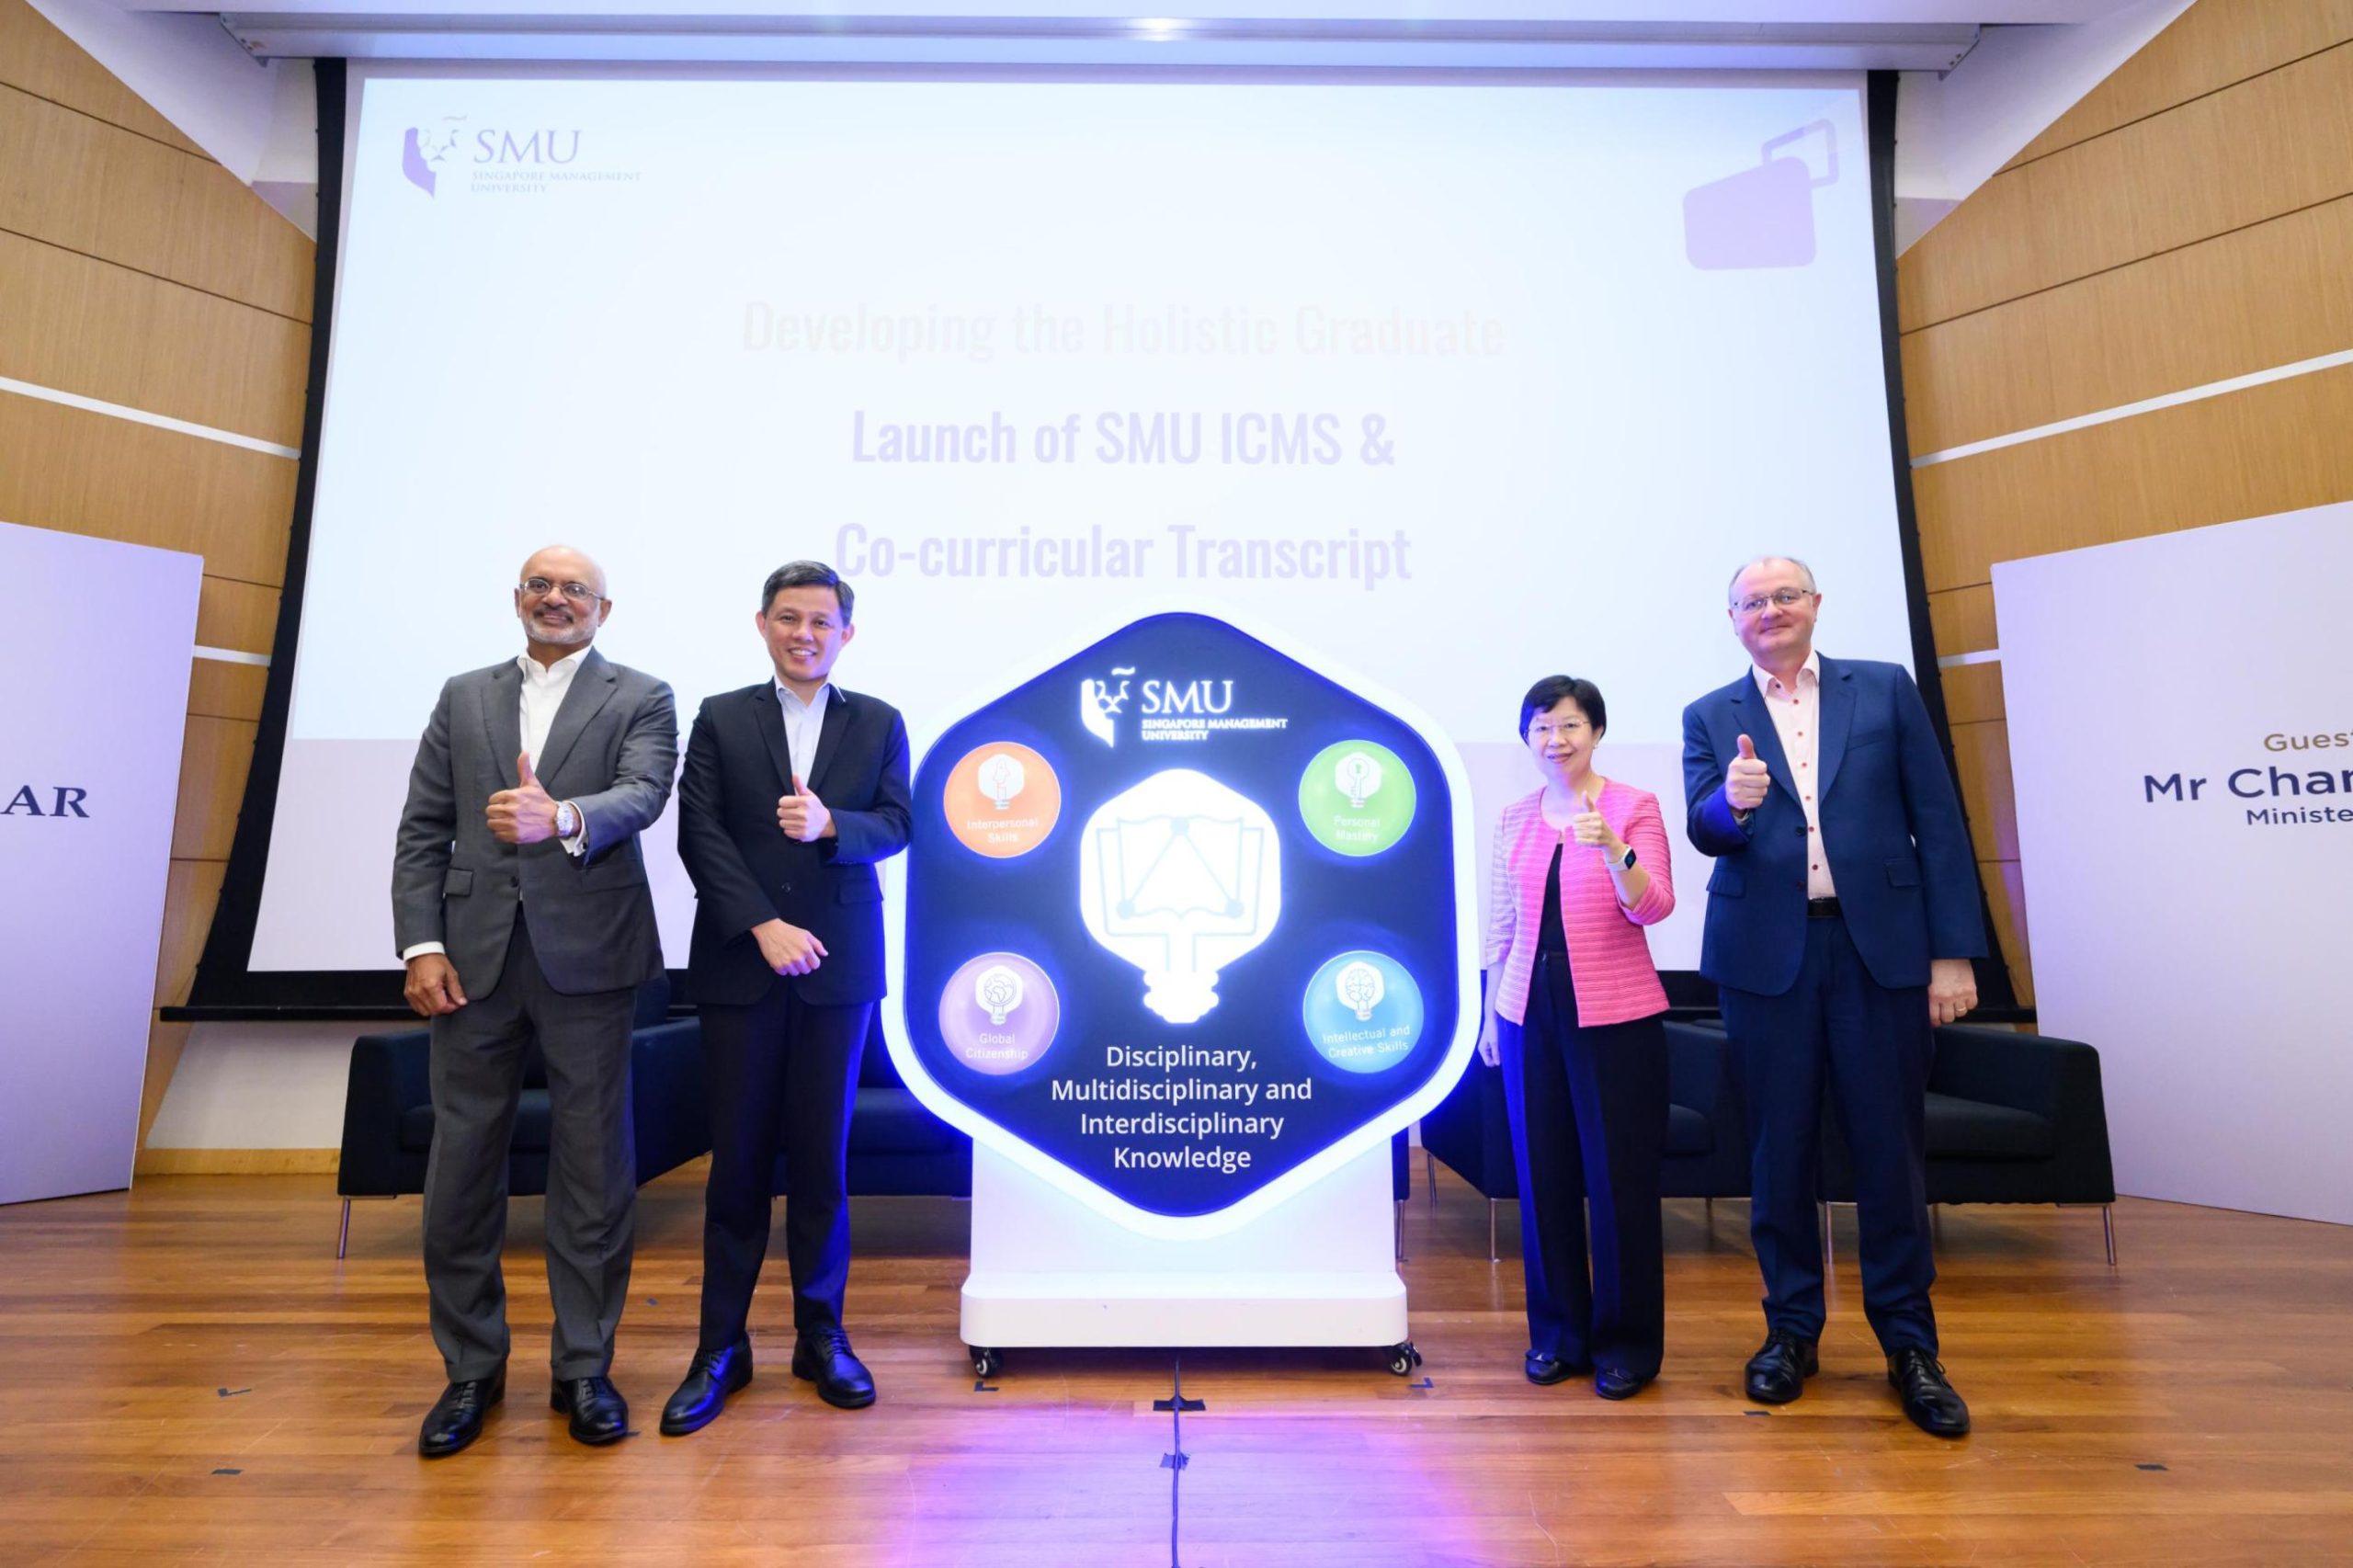 anel giving thumbs up in Singapore at the launch of Singapore Management University, ICMS & Co-Curricular Transcript